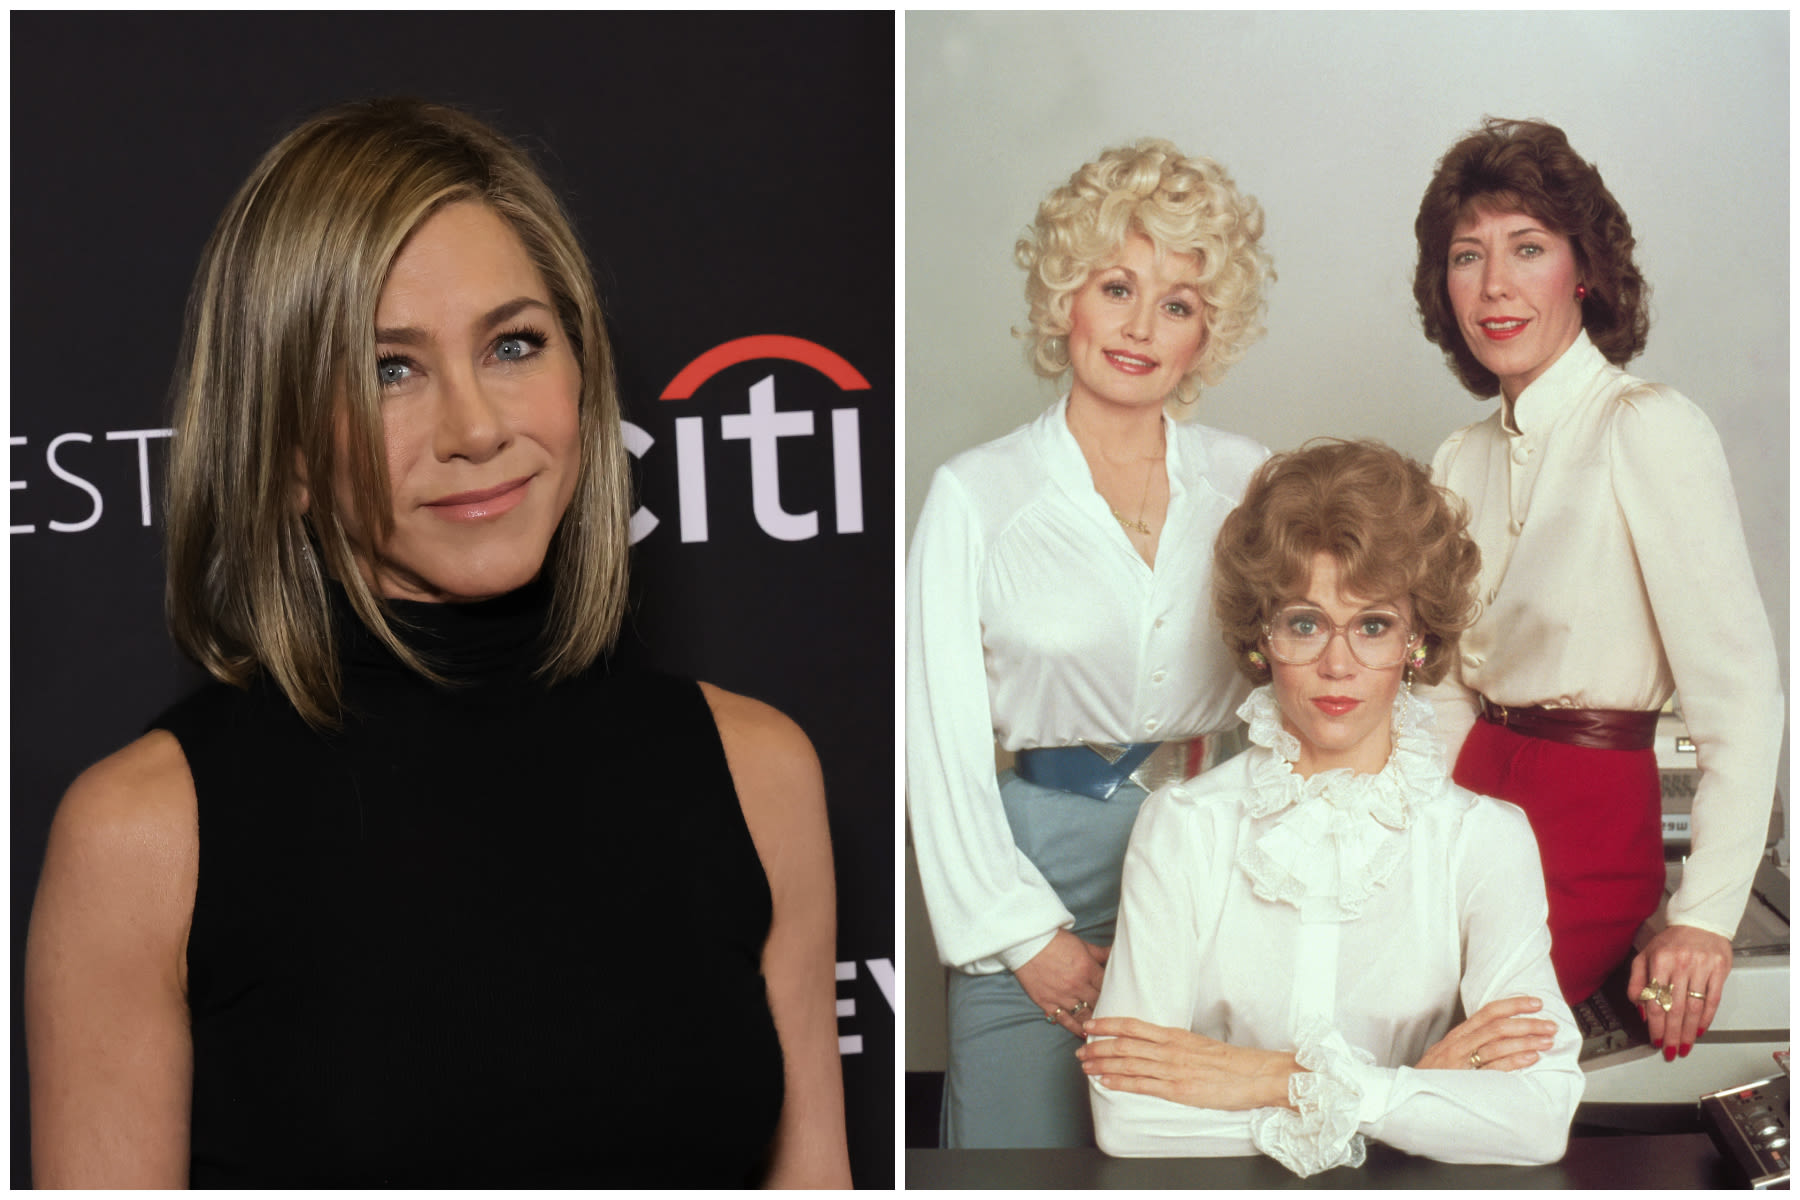 Jane Fonda and Lily Tomlin ‘Eager’ to See Jennifer Aniston’s ‘9 to 5’ Remake: ‘It’s a Hard Nut to Crack’